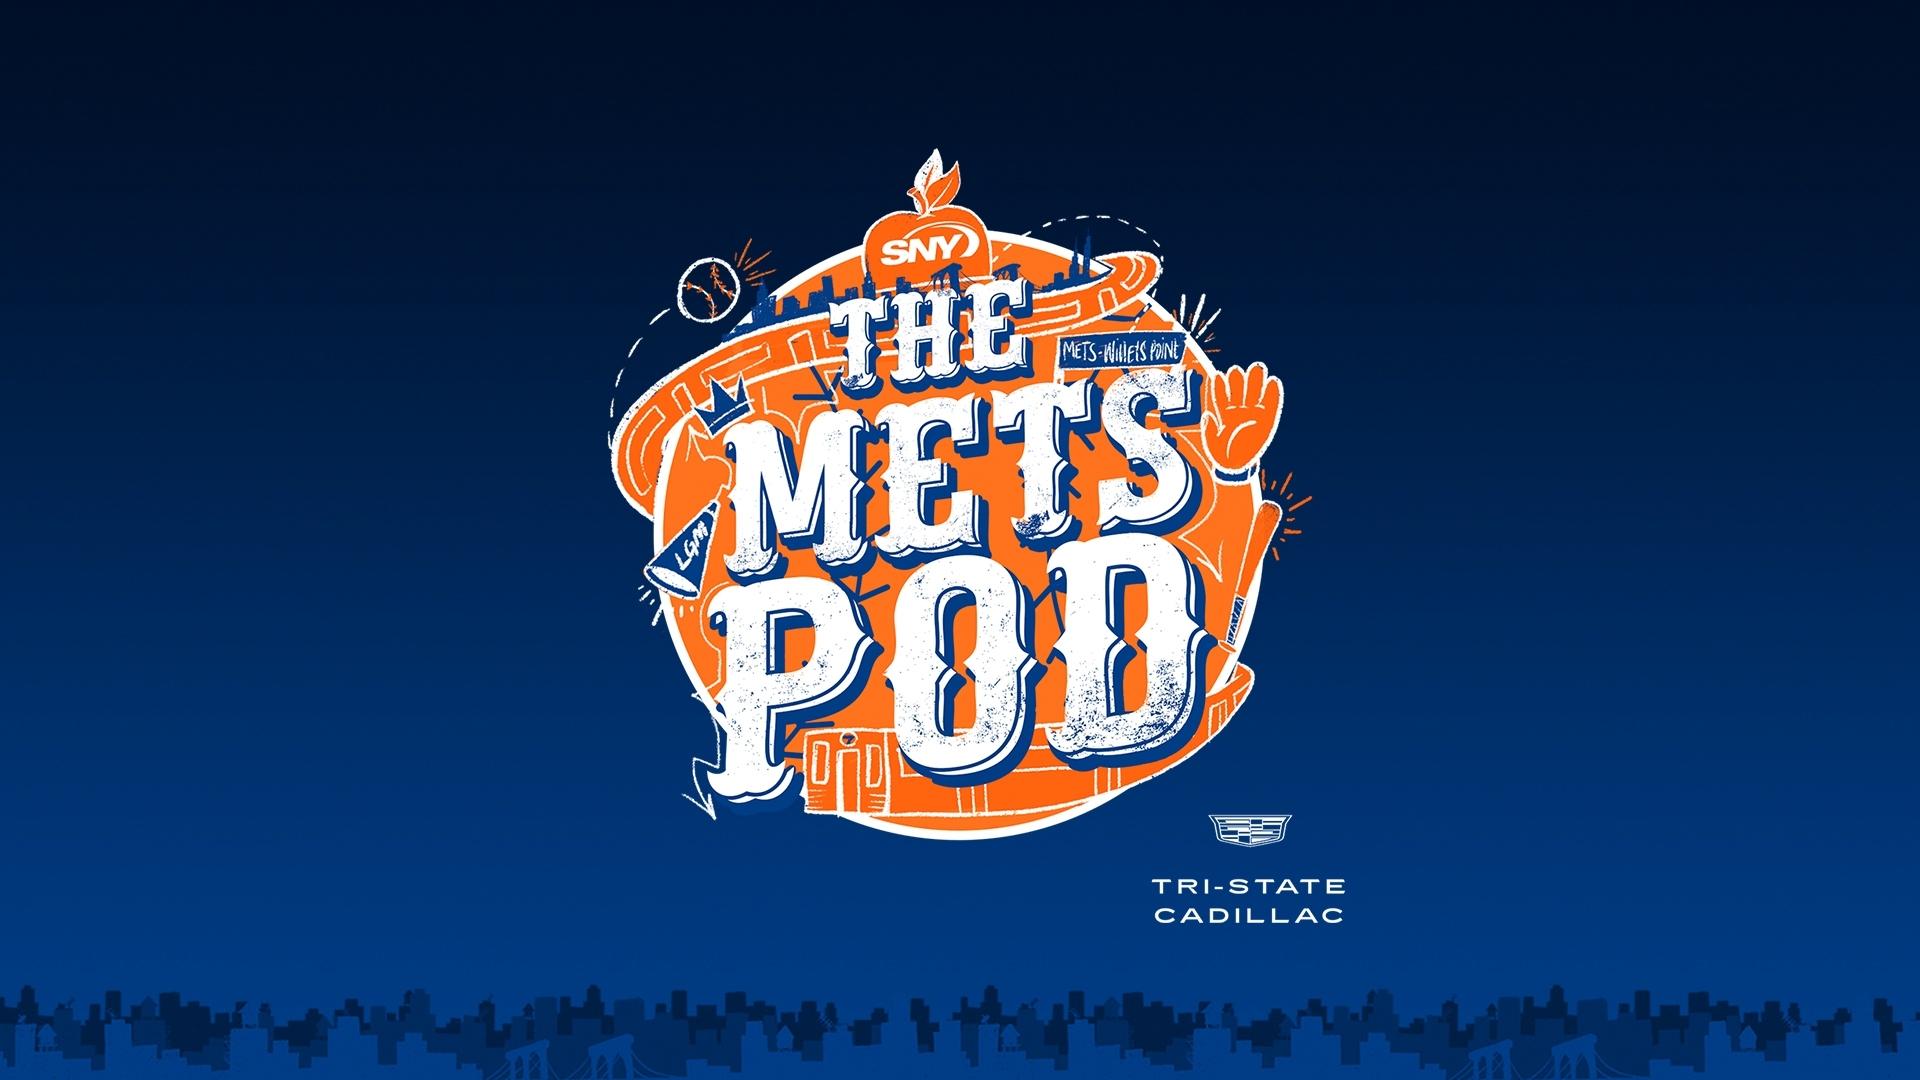 Live from Citi Field for a Mets vs Yankees Subway Series showdown | The Mets Pod